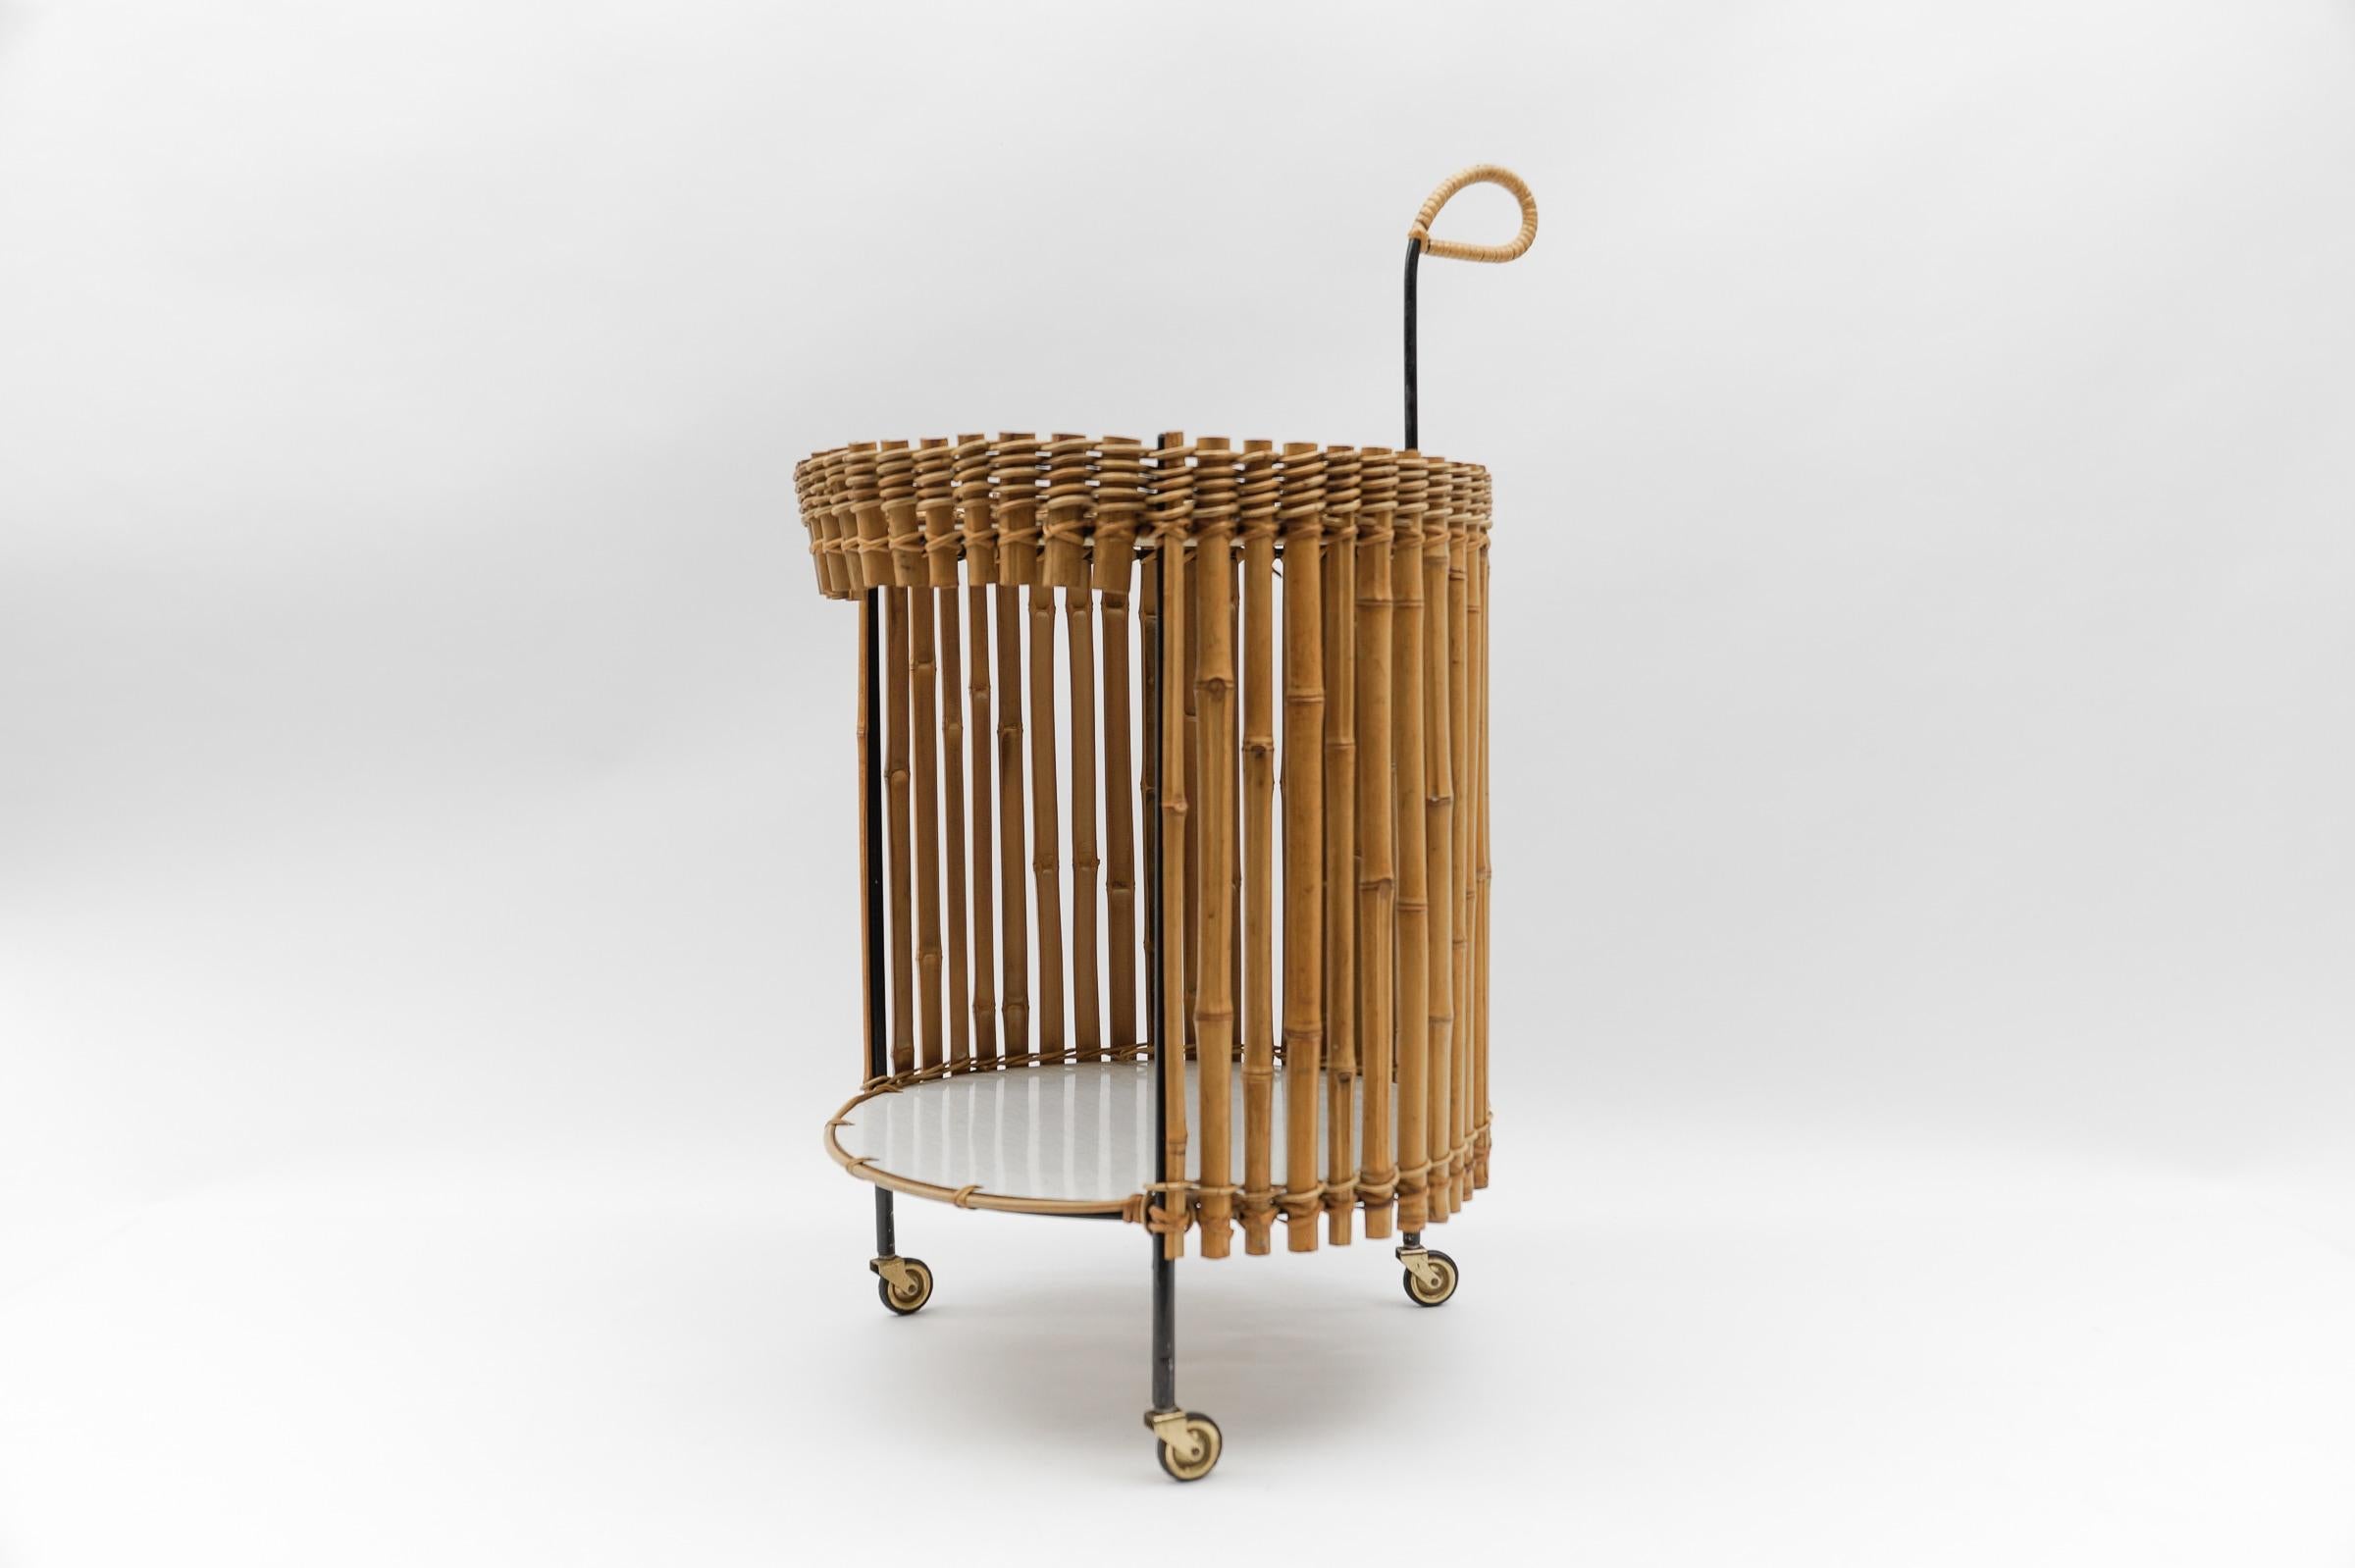 Stunning midcentury round serving cart in bamboo and metal. This unique piece was produced in Austria in the 1950s.